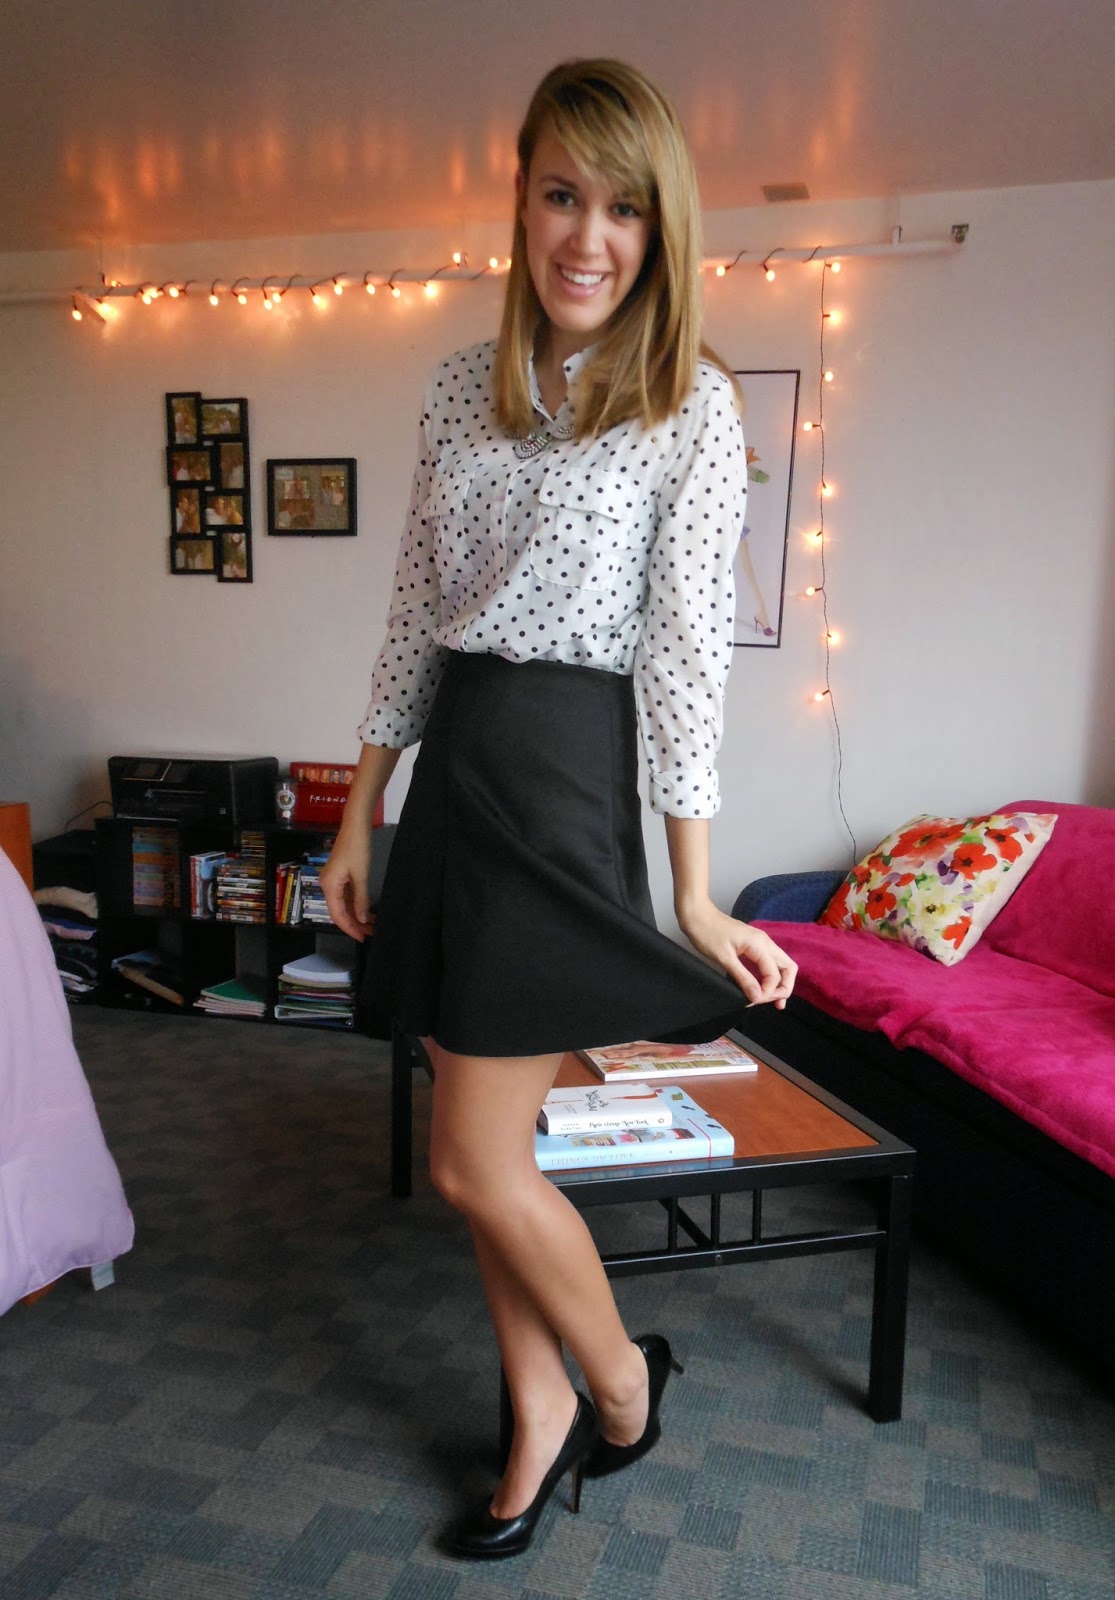 dress in sparkles: polka dots and heels